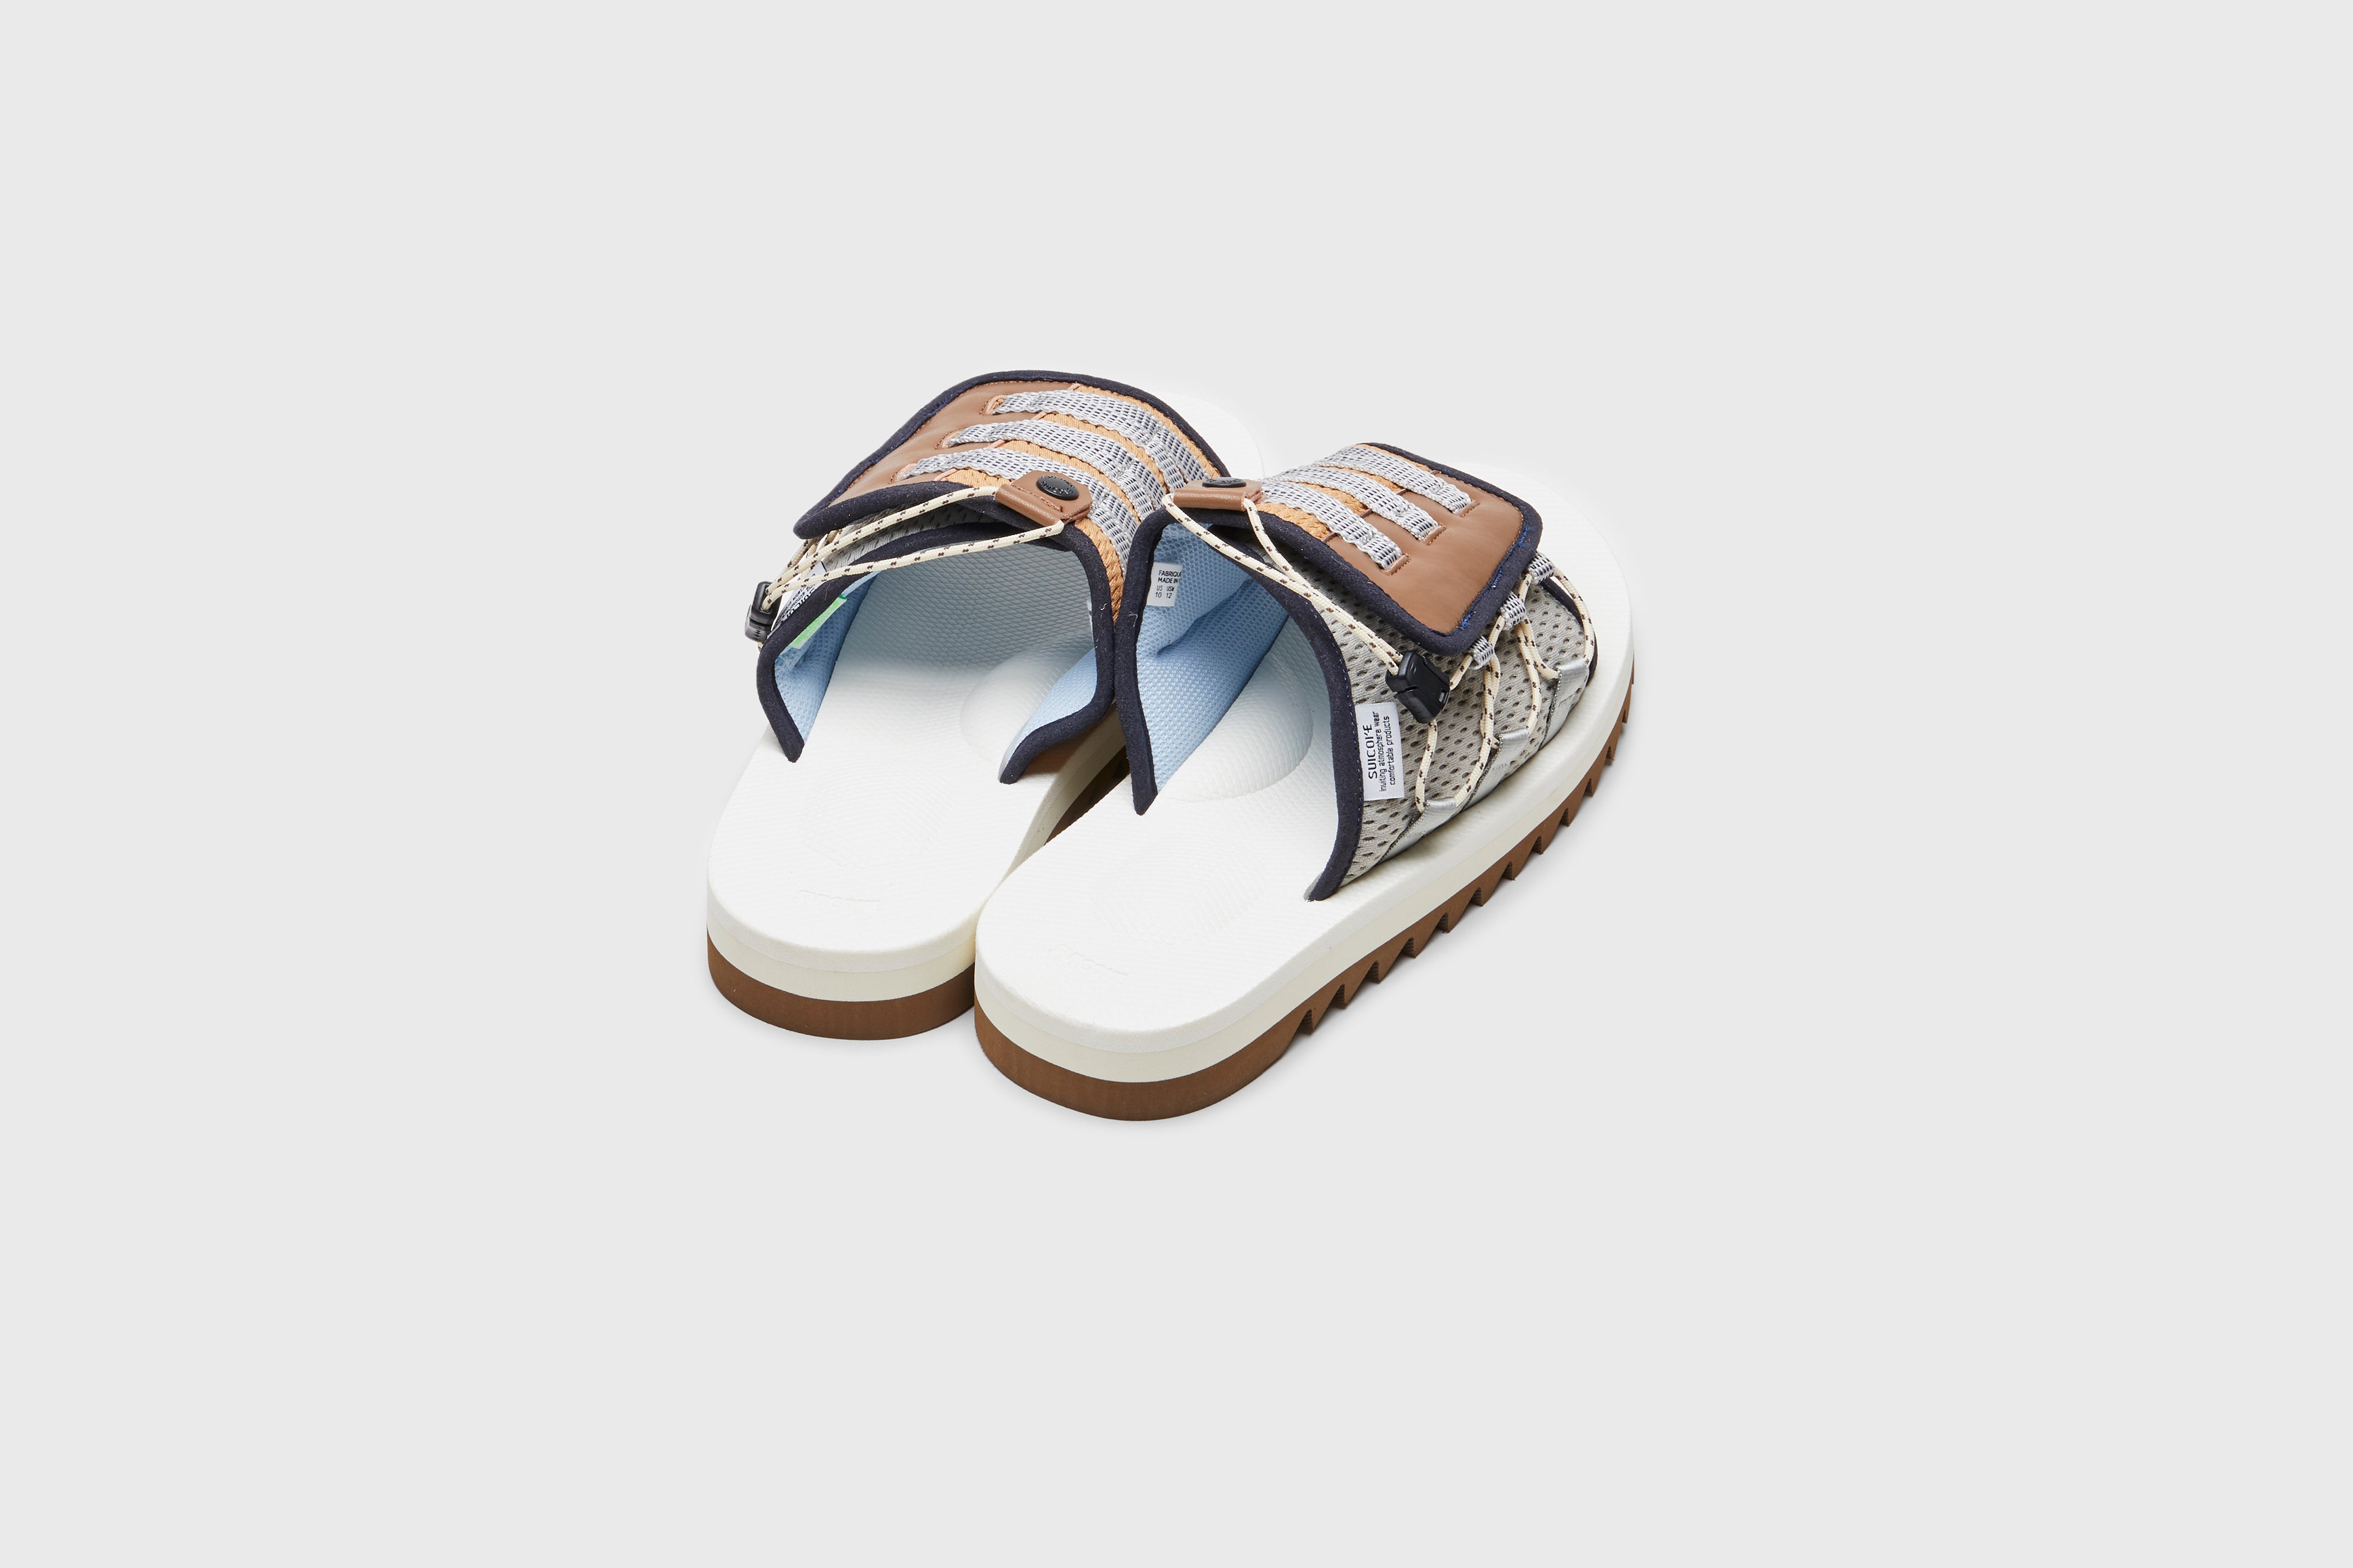 SUICOKE DAO-2AB slides with navy & white nylon upper, navy & white midsole and sole, strap and logo patch. From Spring/Summer 2023 collection on eightywingold Web Store, an official partner of SUICOKE. OG-195-2AB NAVY X WHITE